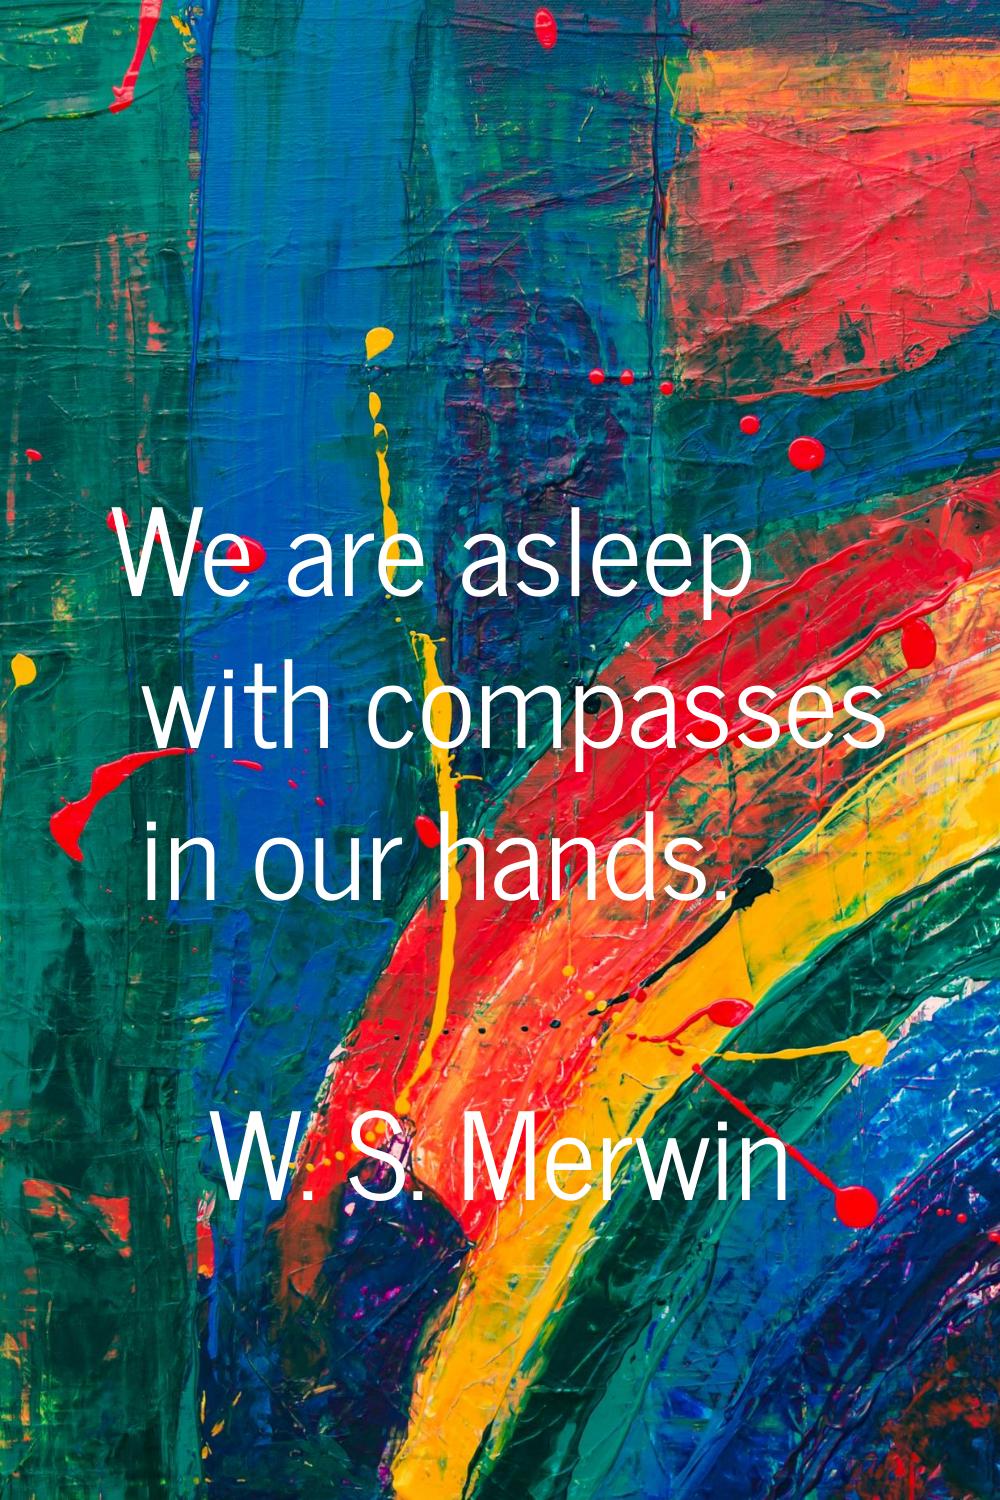 We are asleep with compasses in our hands.